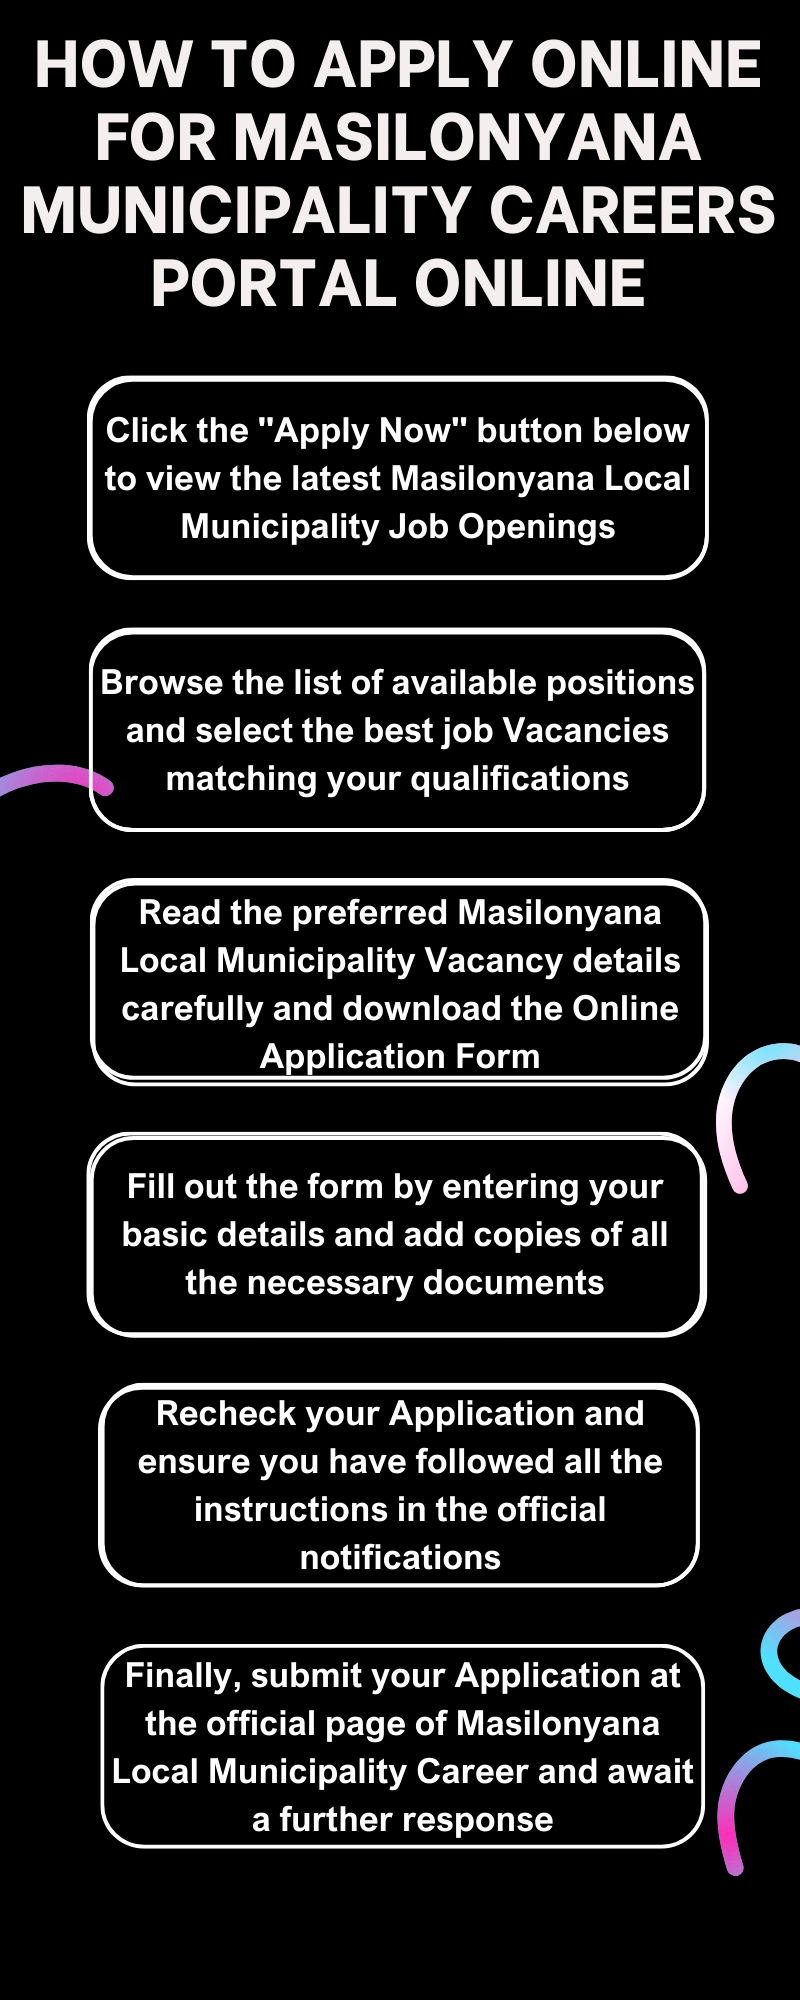 How to Apply online for Masilonyana Municipality Careers Portal Online